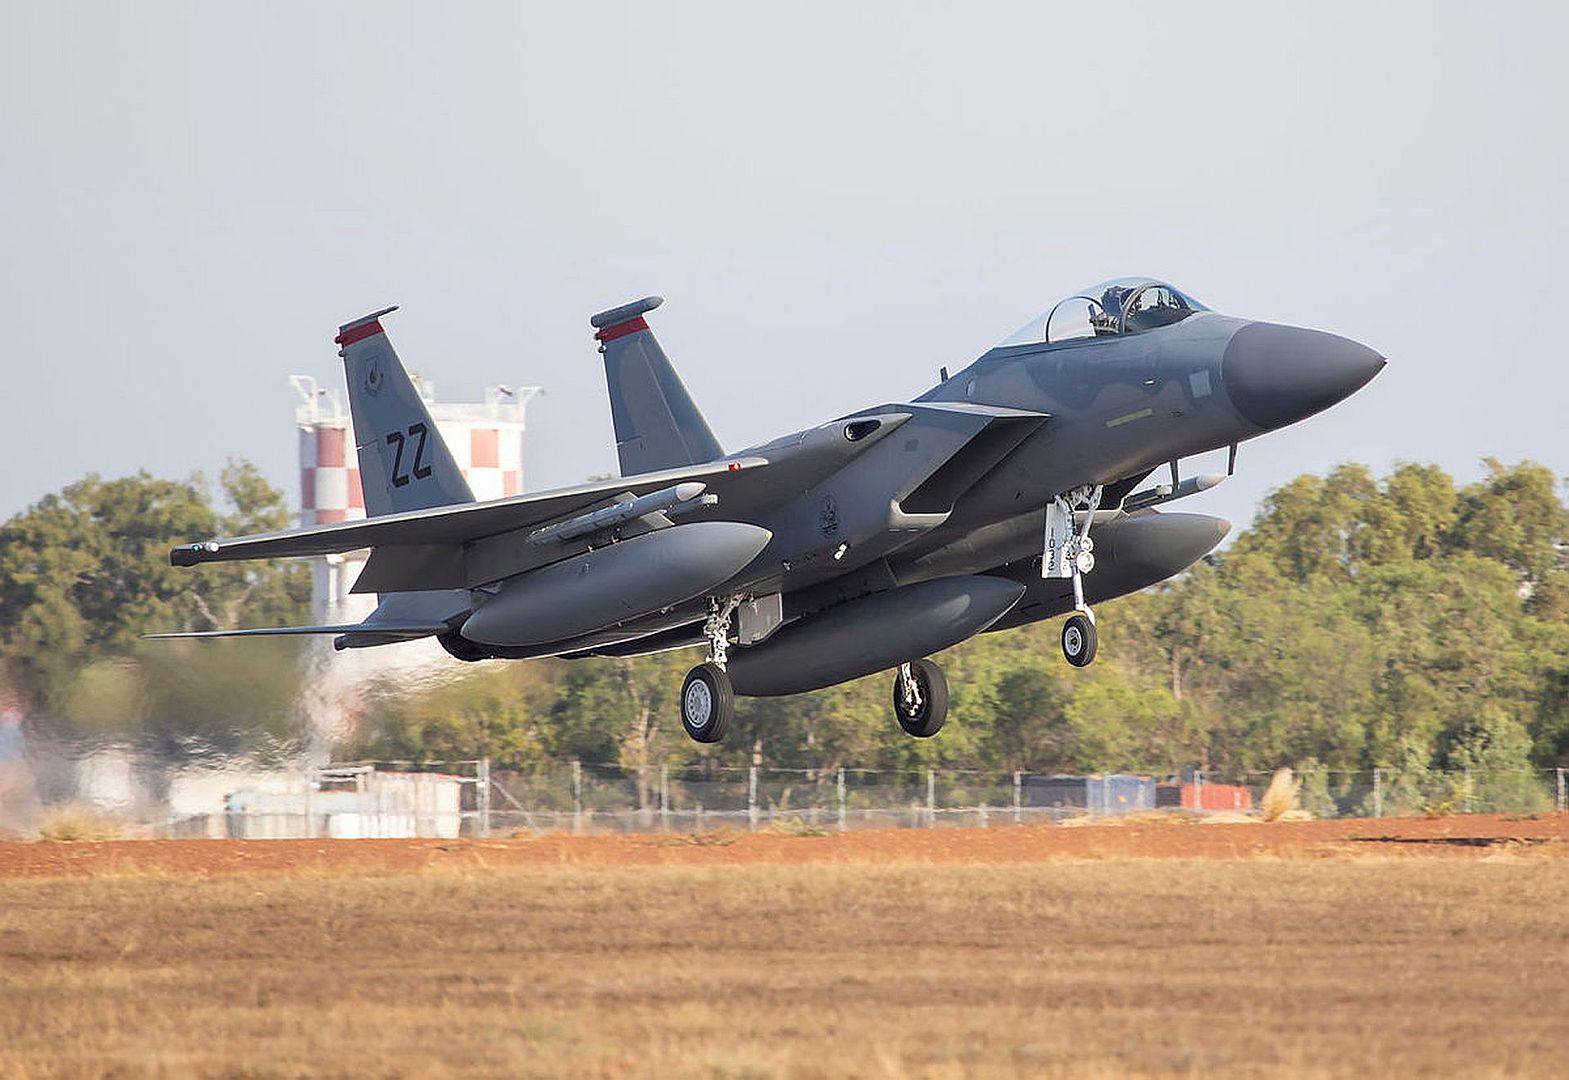 15C Eagle From Kadena Air Force Base In Japan Arrives In Darwin For Exercise Pitch Black 22